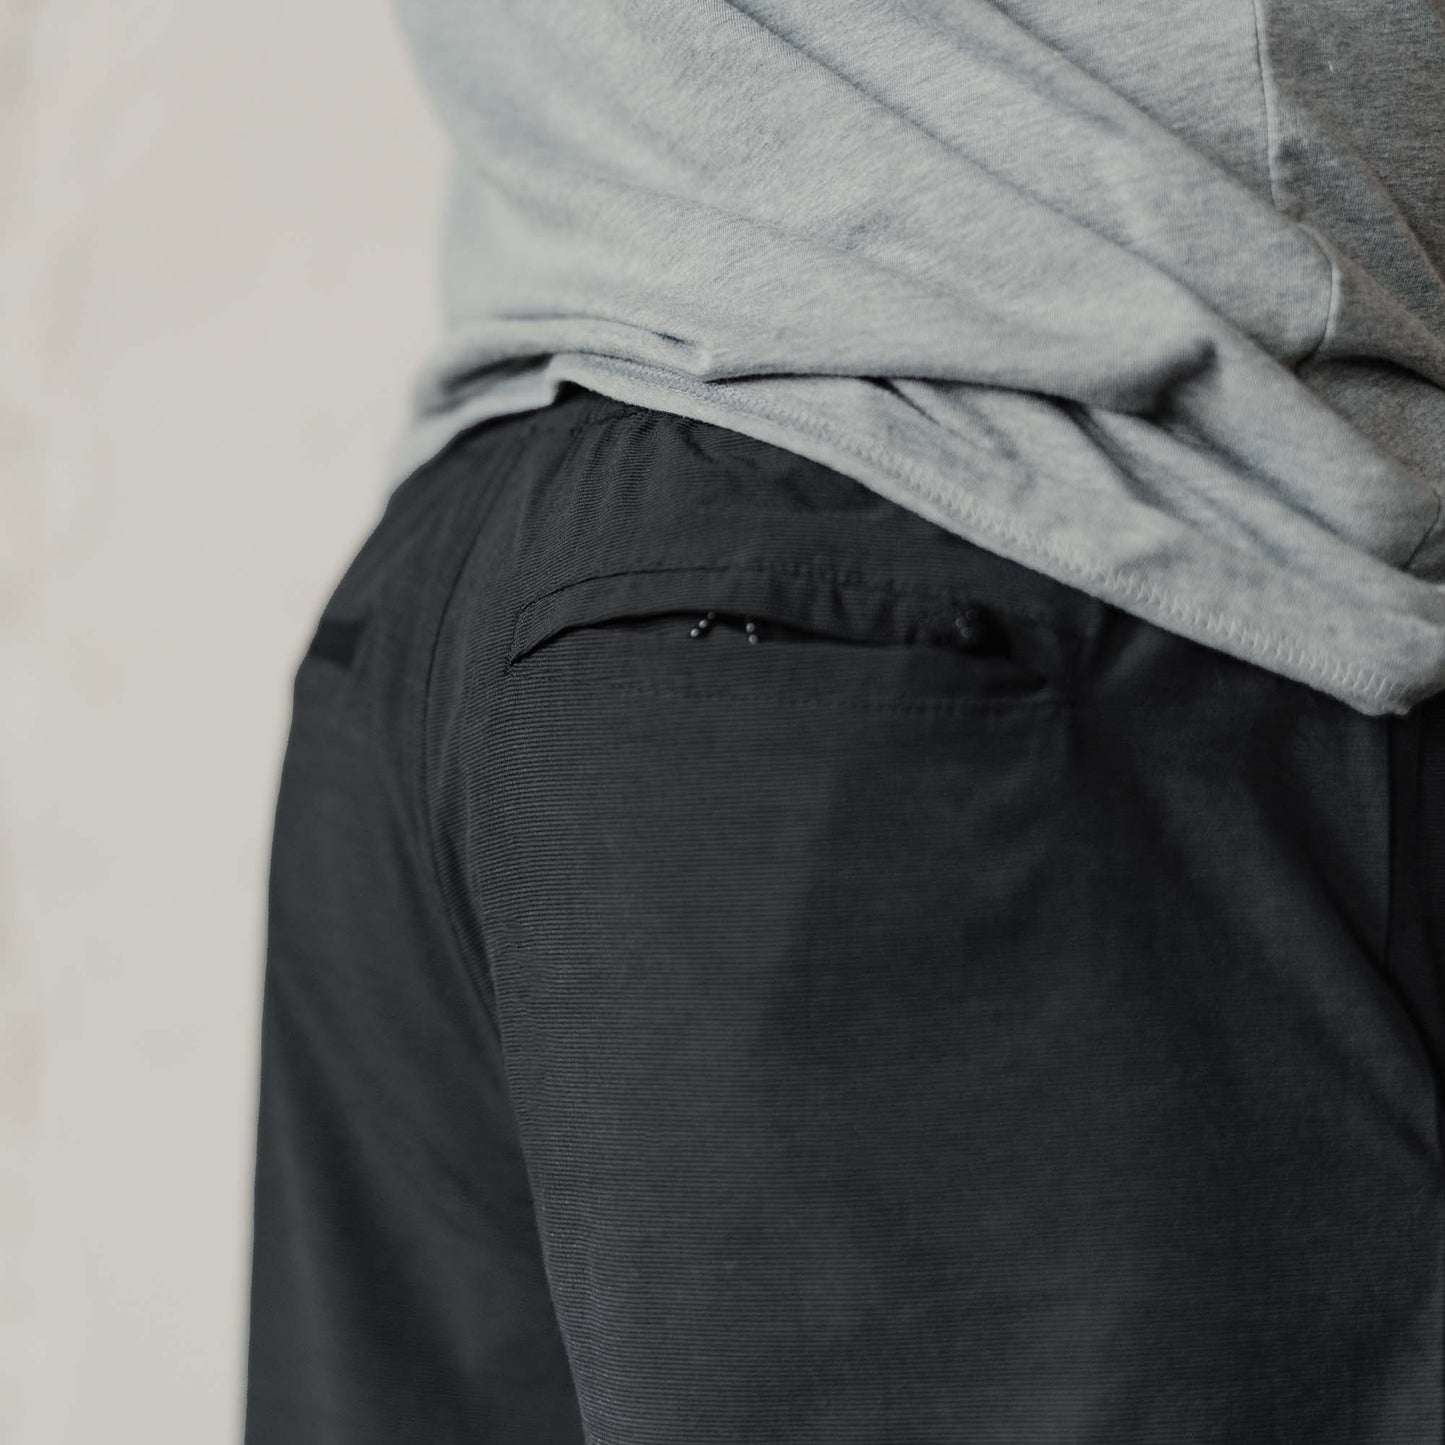 Men's Utility Shorts 2.0 in Charcoal | Grunt Style 